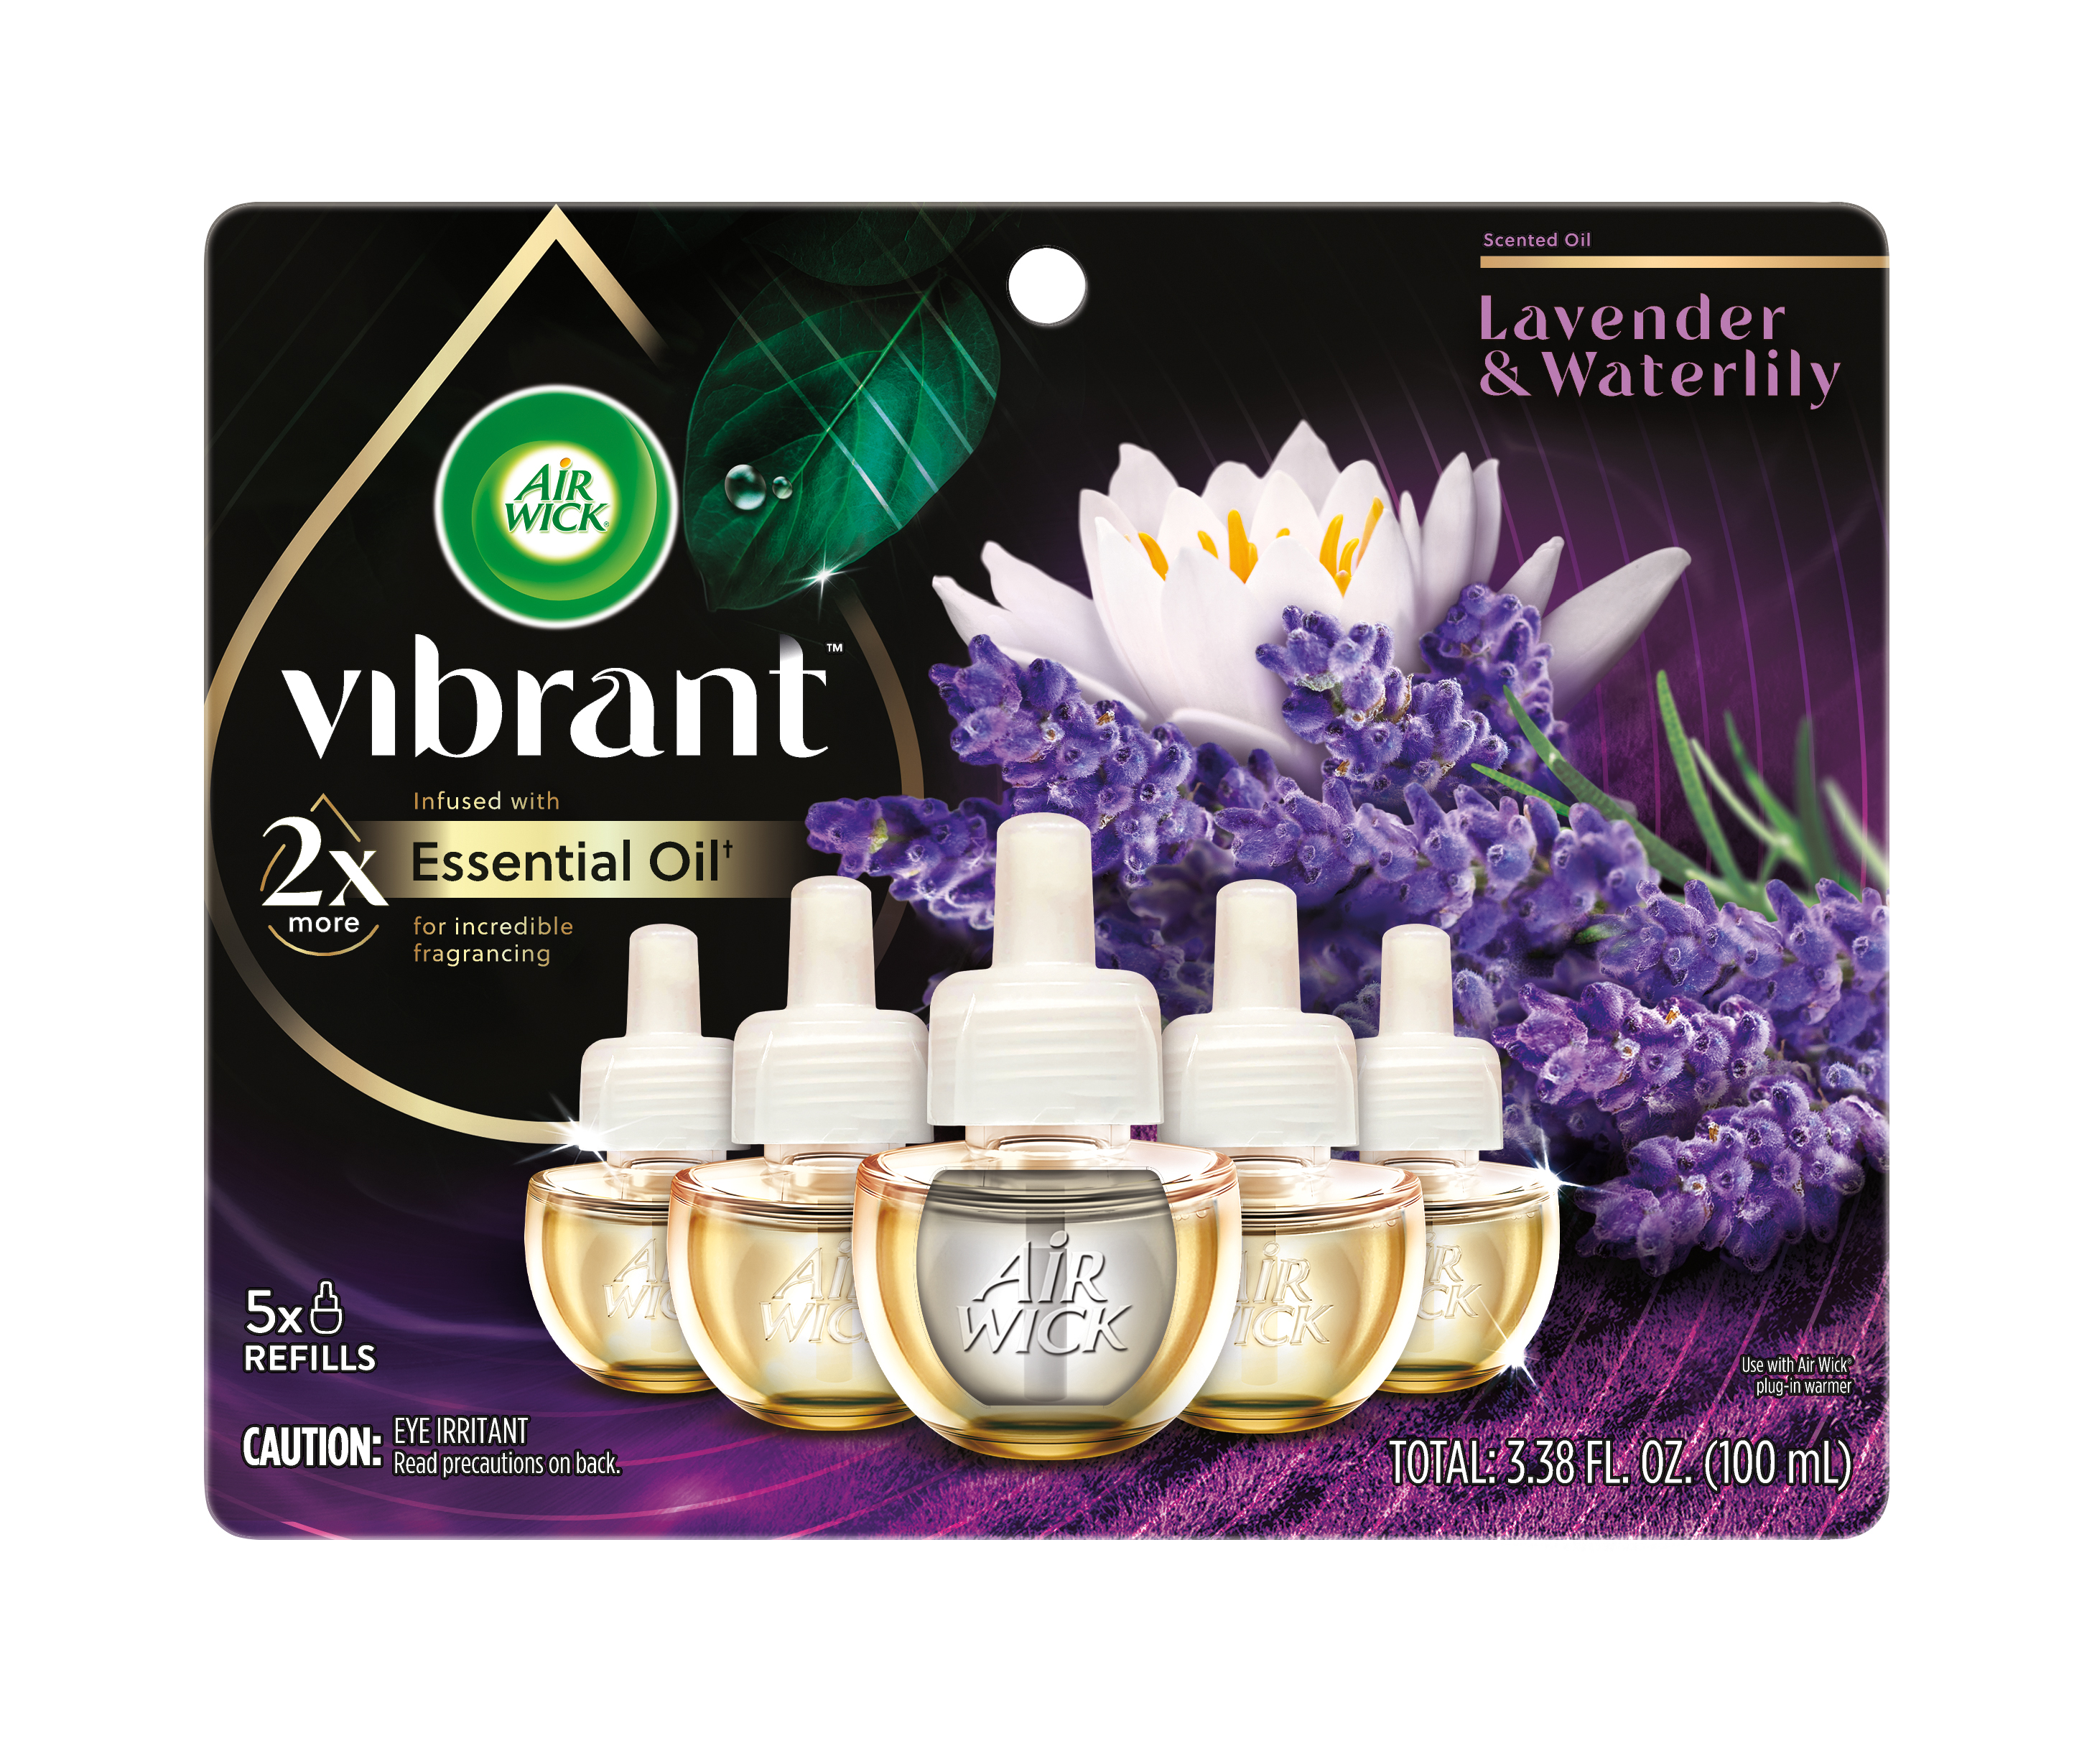 AIR WICK® Scented Oil - Lavender & Waterlily (Vibrant)